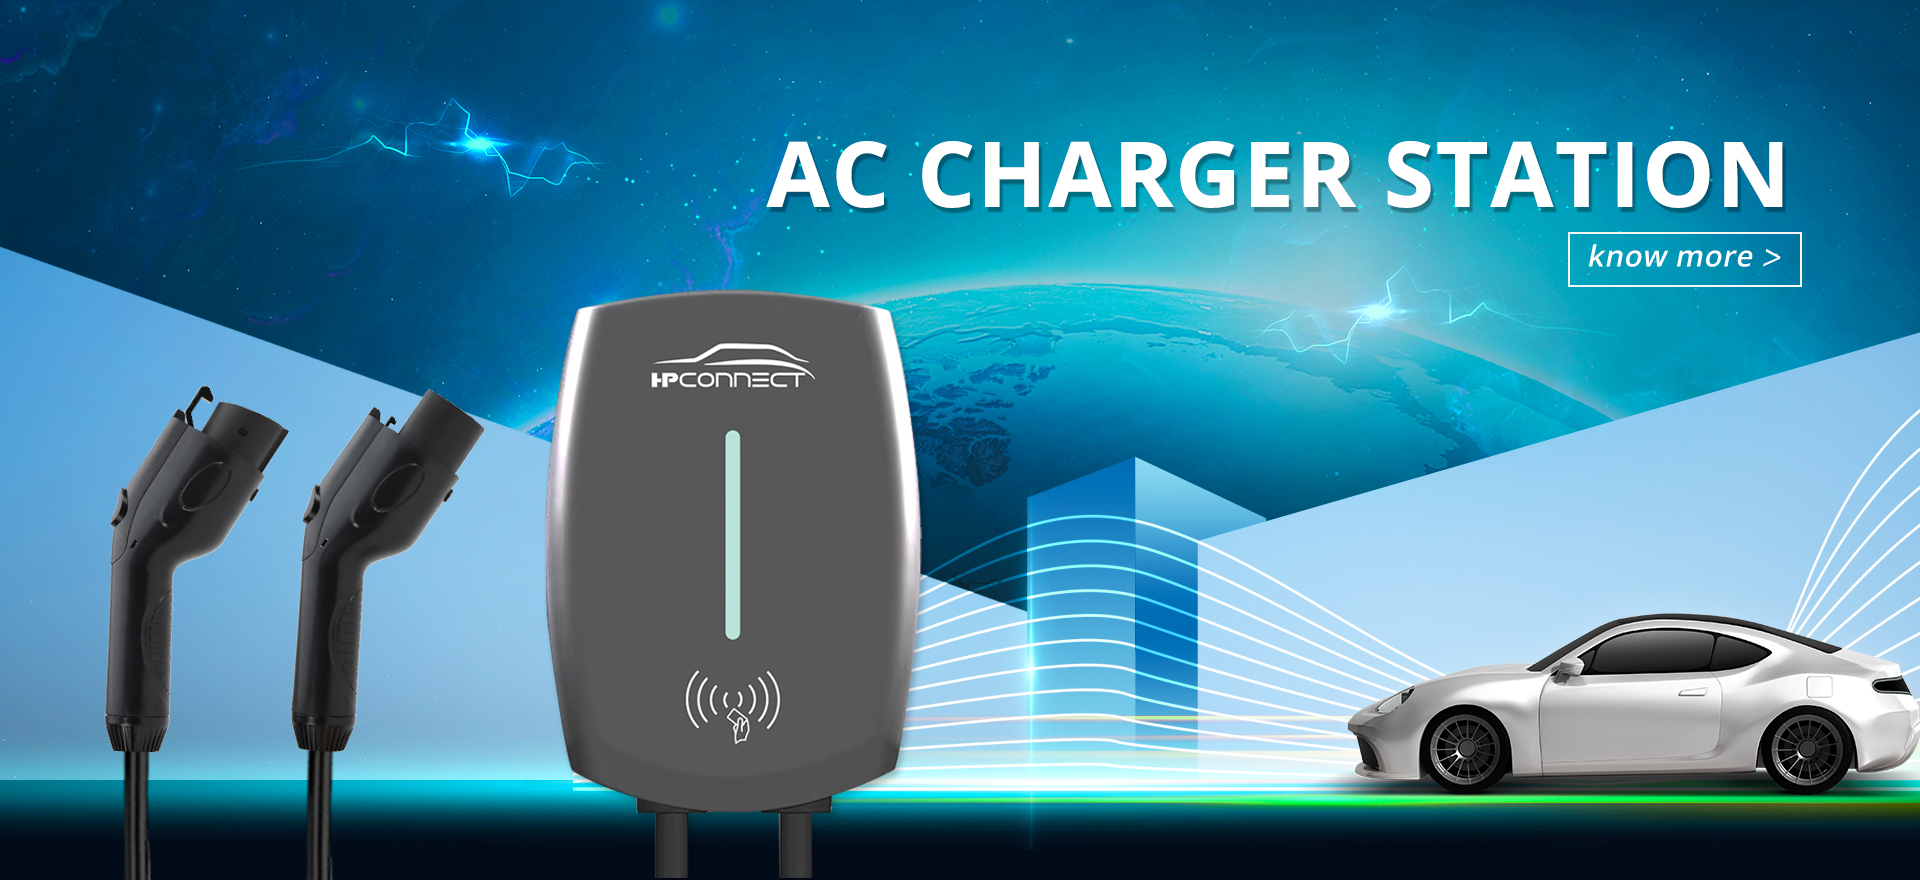 AC Charger Station